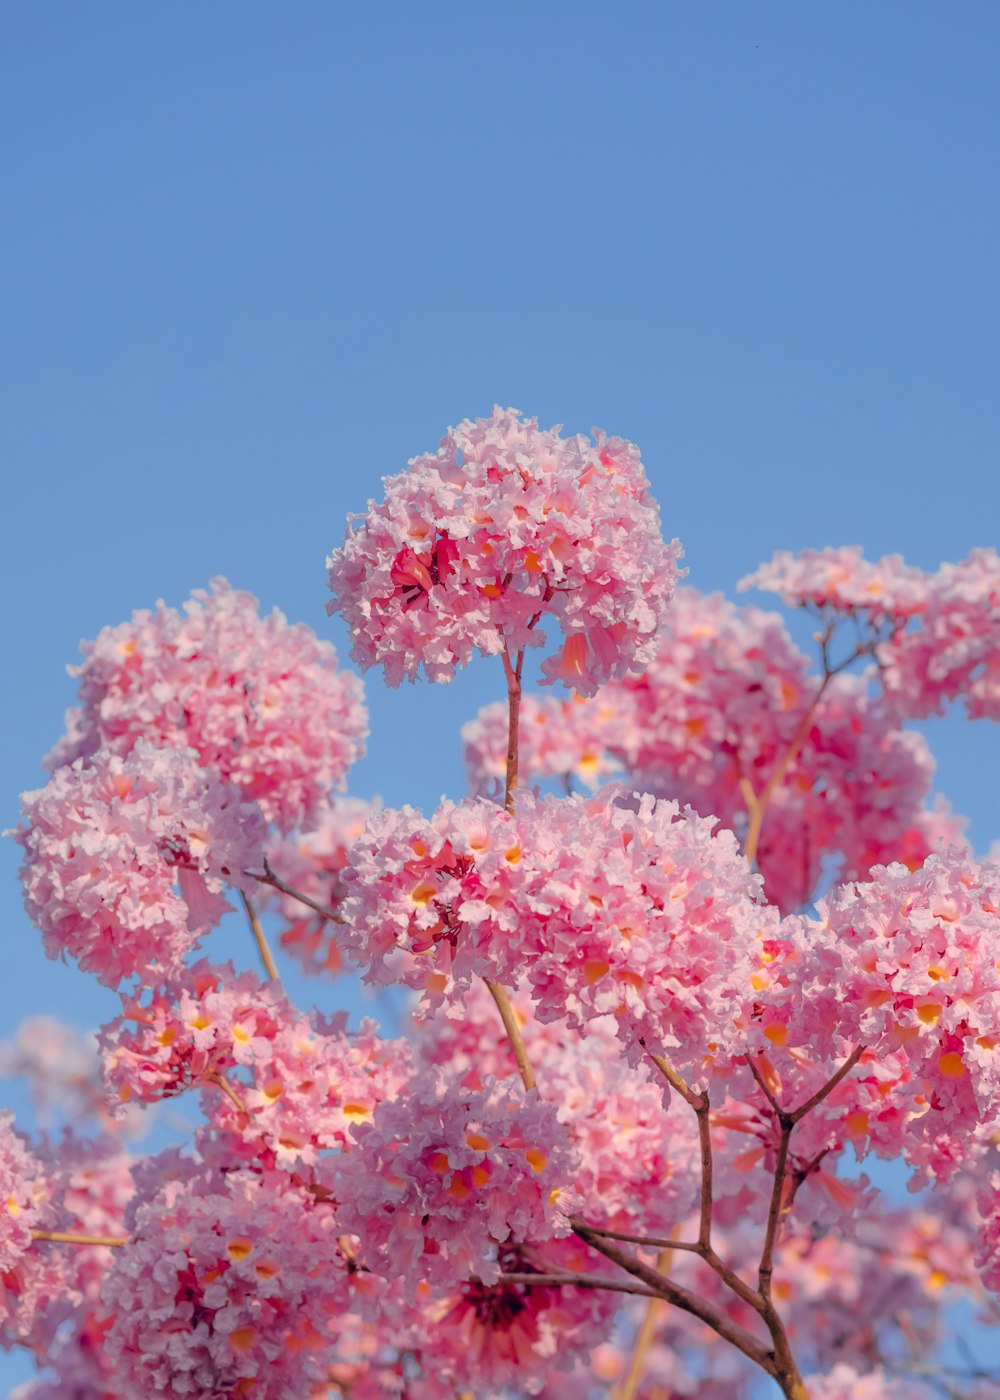 pink flowers are blooming in the blue sky